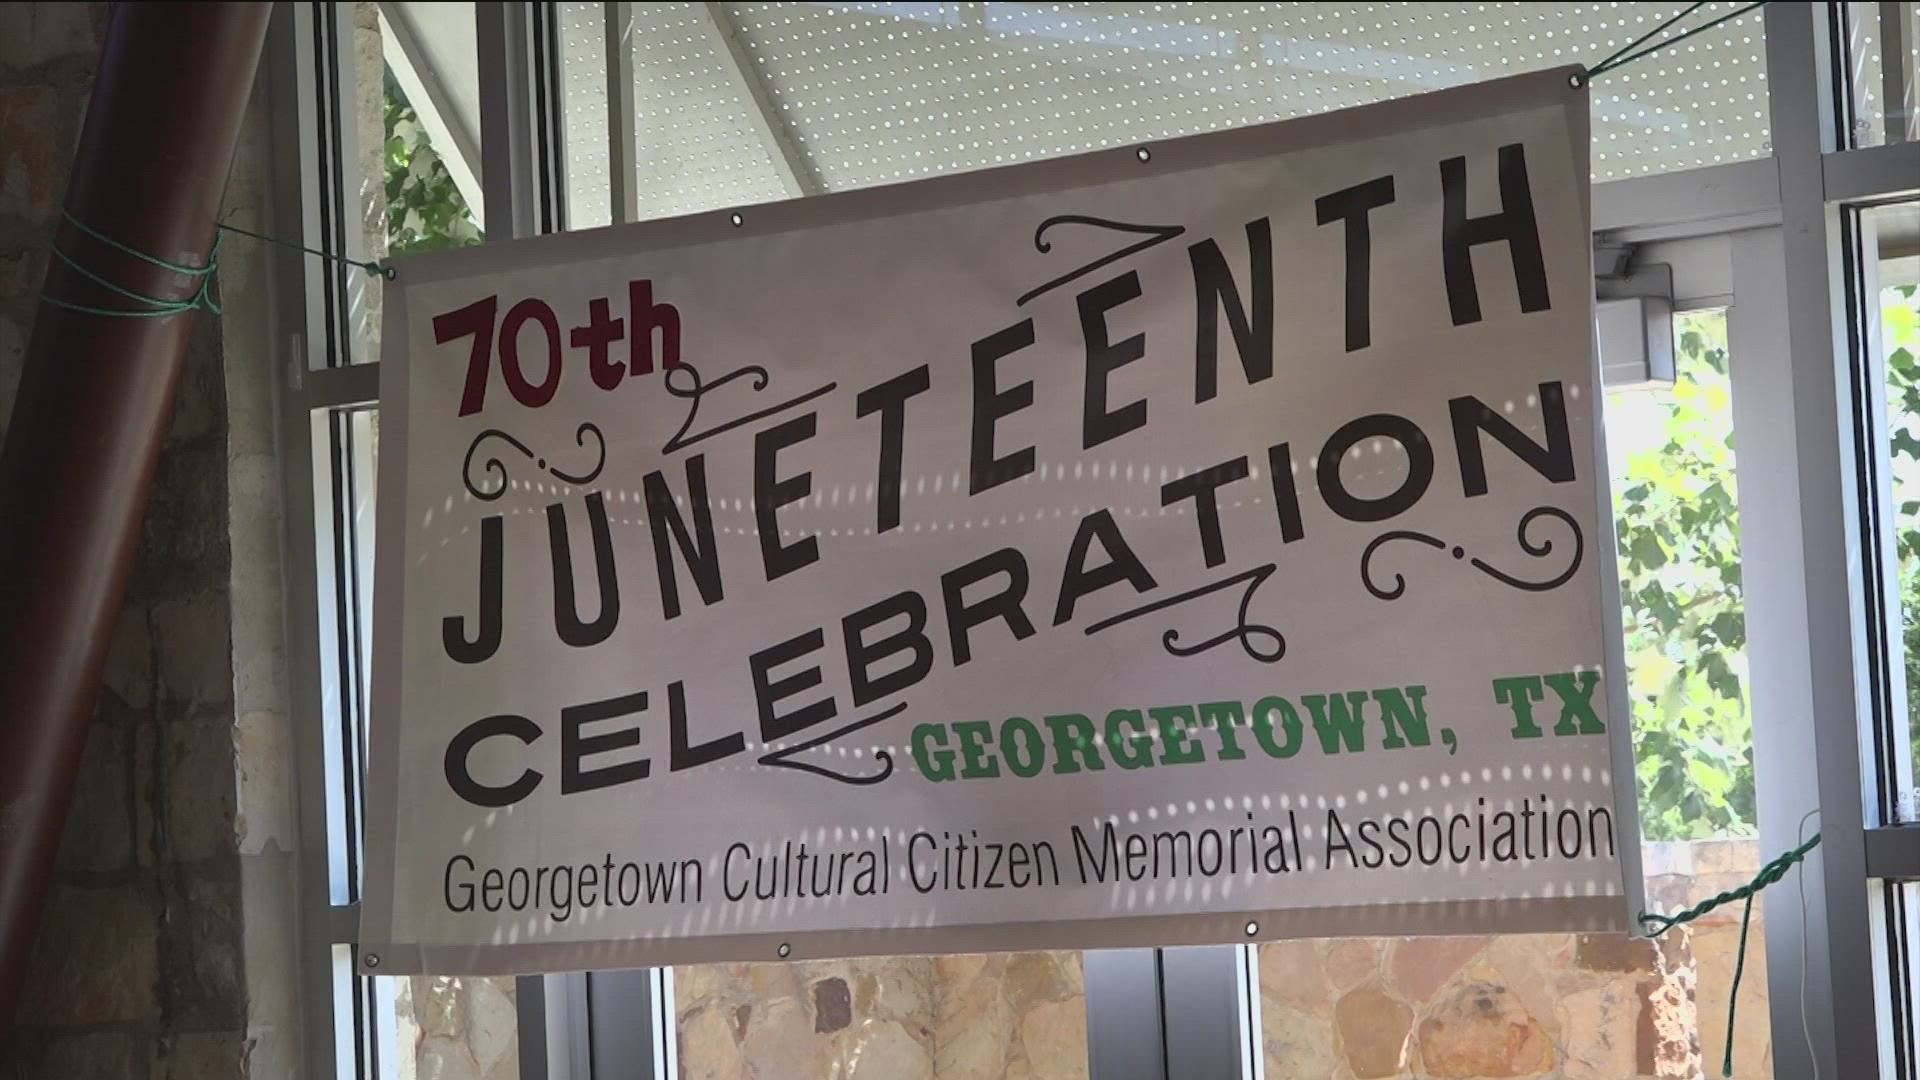 Alma Allen Johnson with the celebration planning committee said remembering the country's history with slavery for Juneteenth shows how far the U.S. has come since.